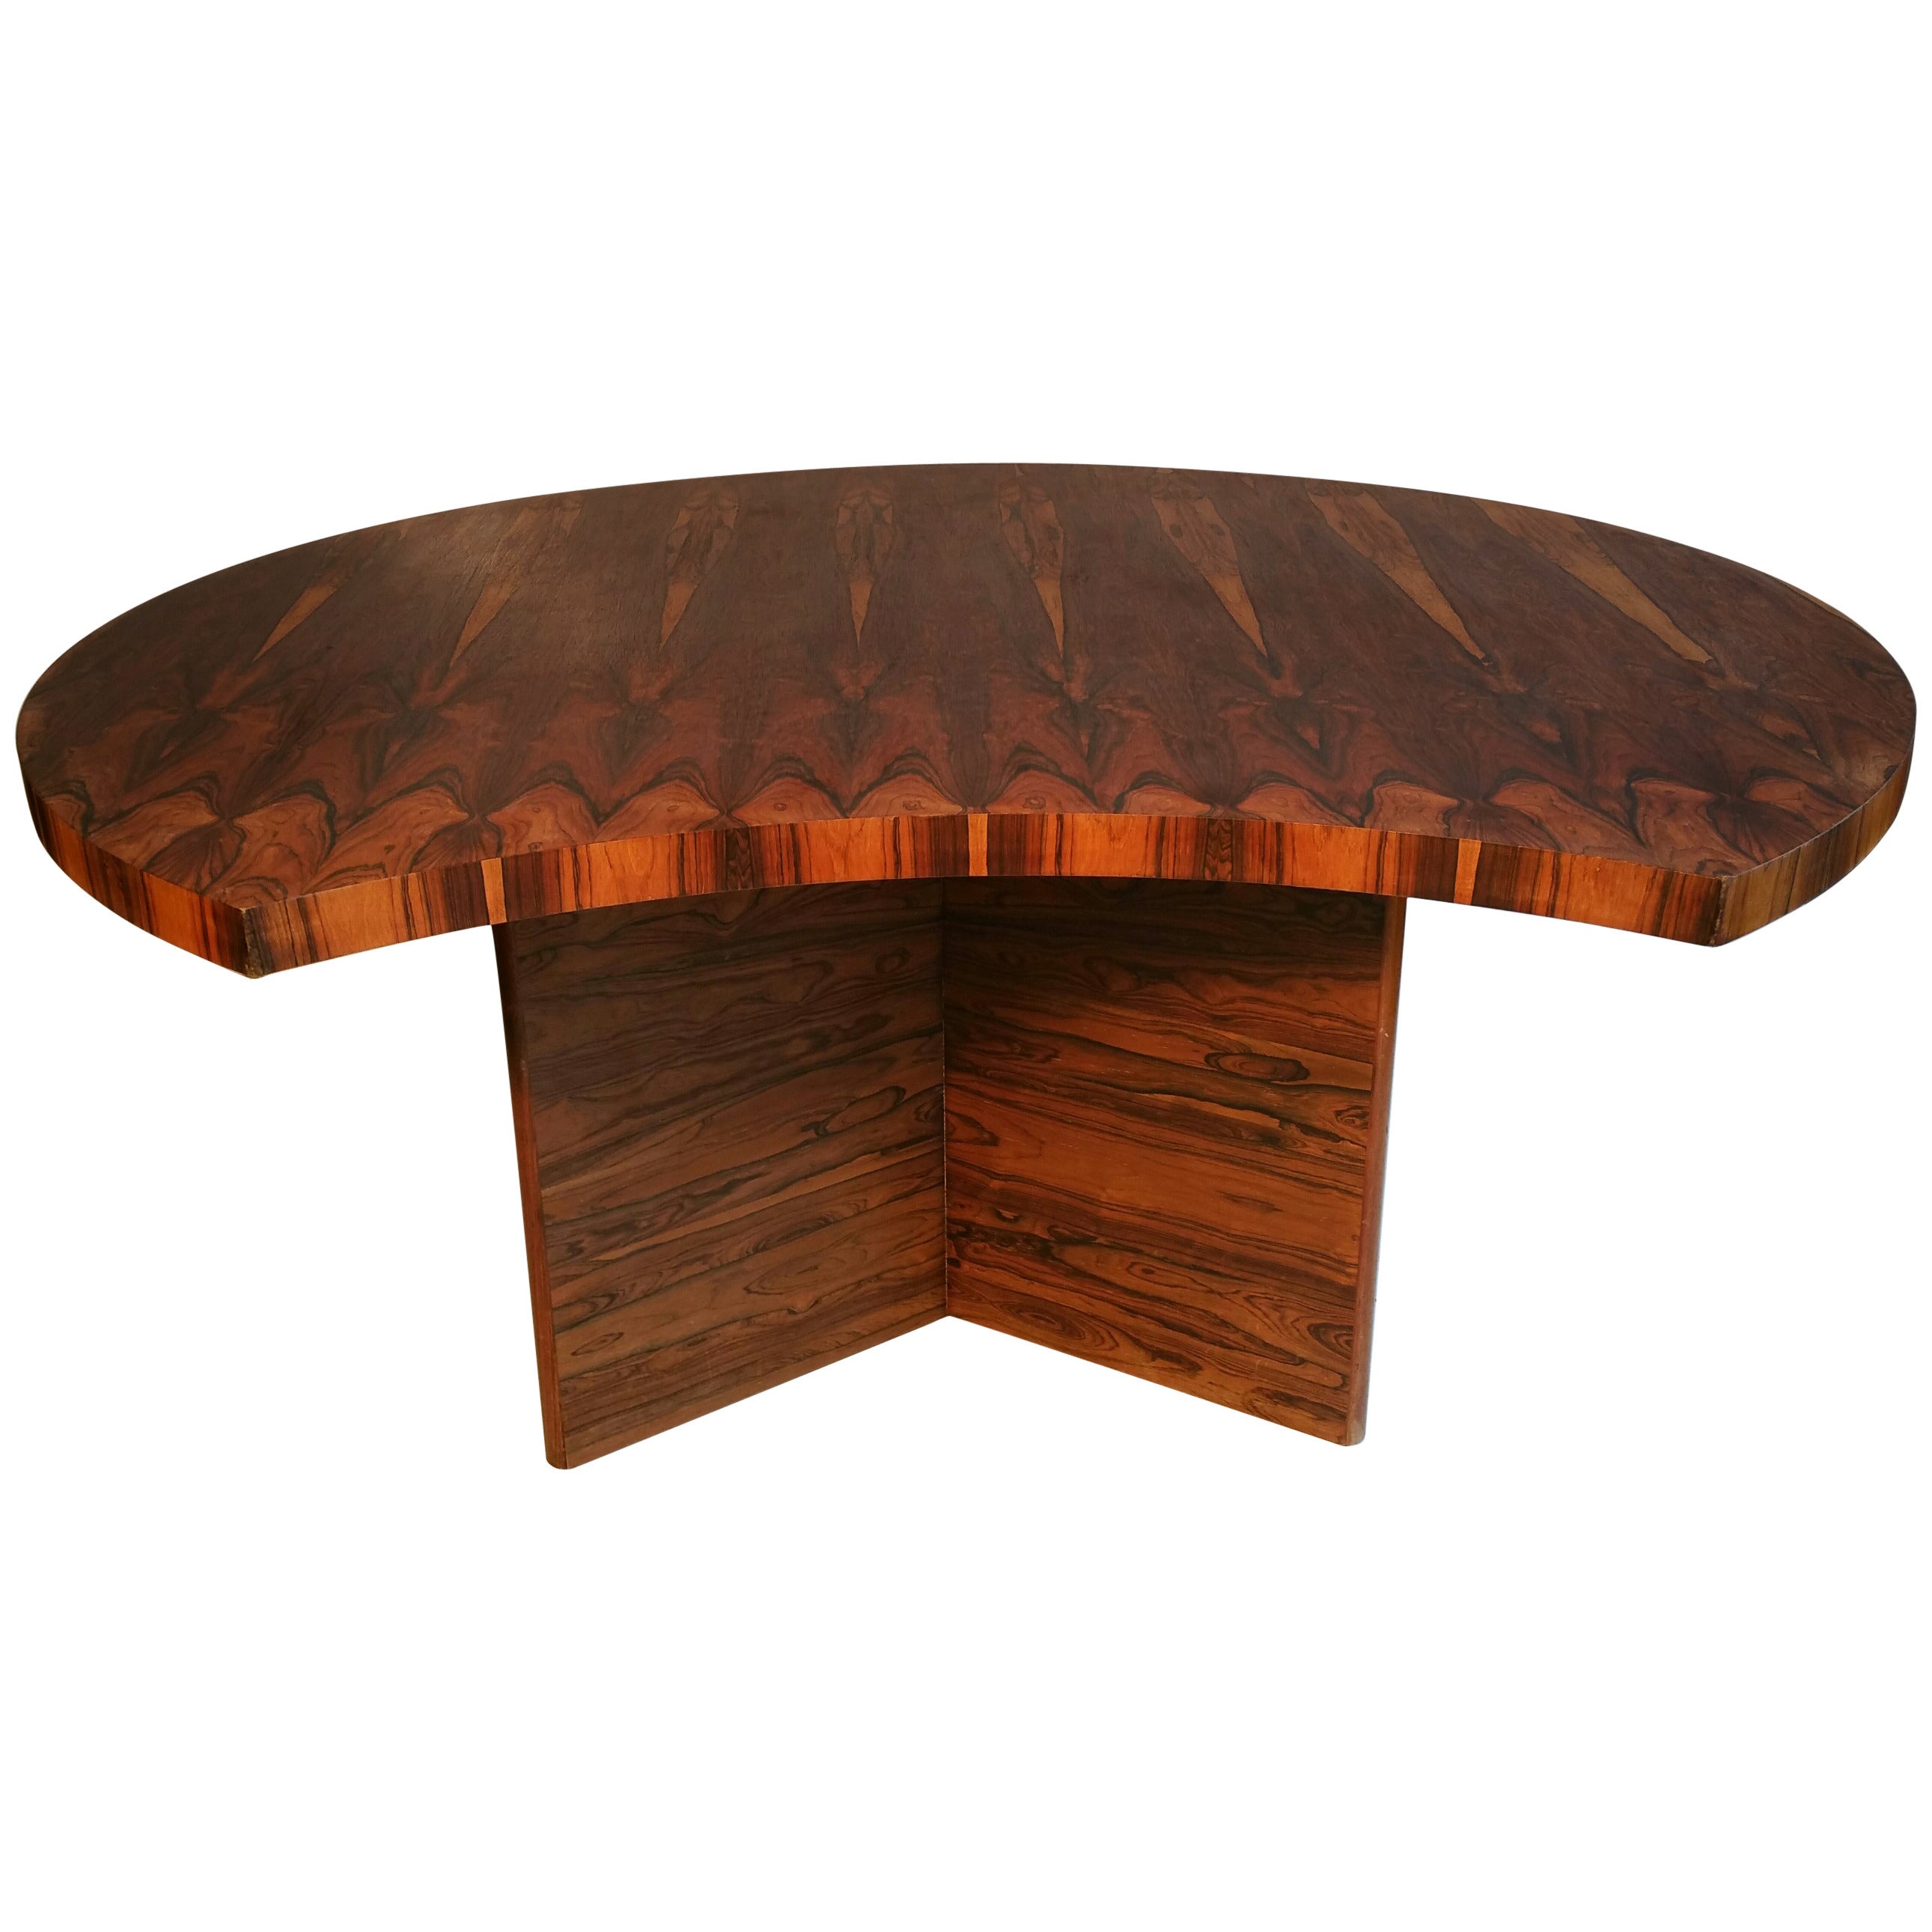 Bookmatched Brazilian Rosewood Desk by Leif Jacobsen, Denmark